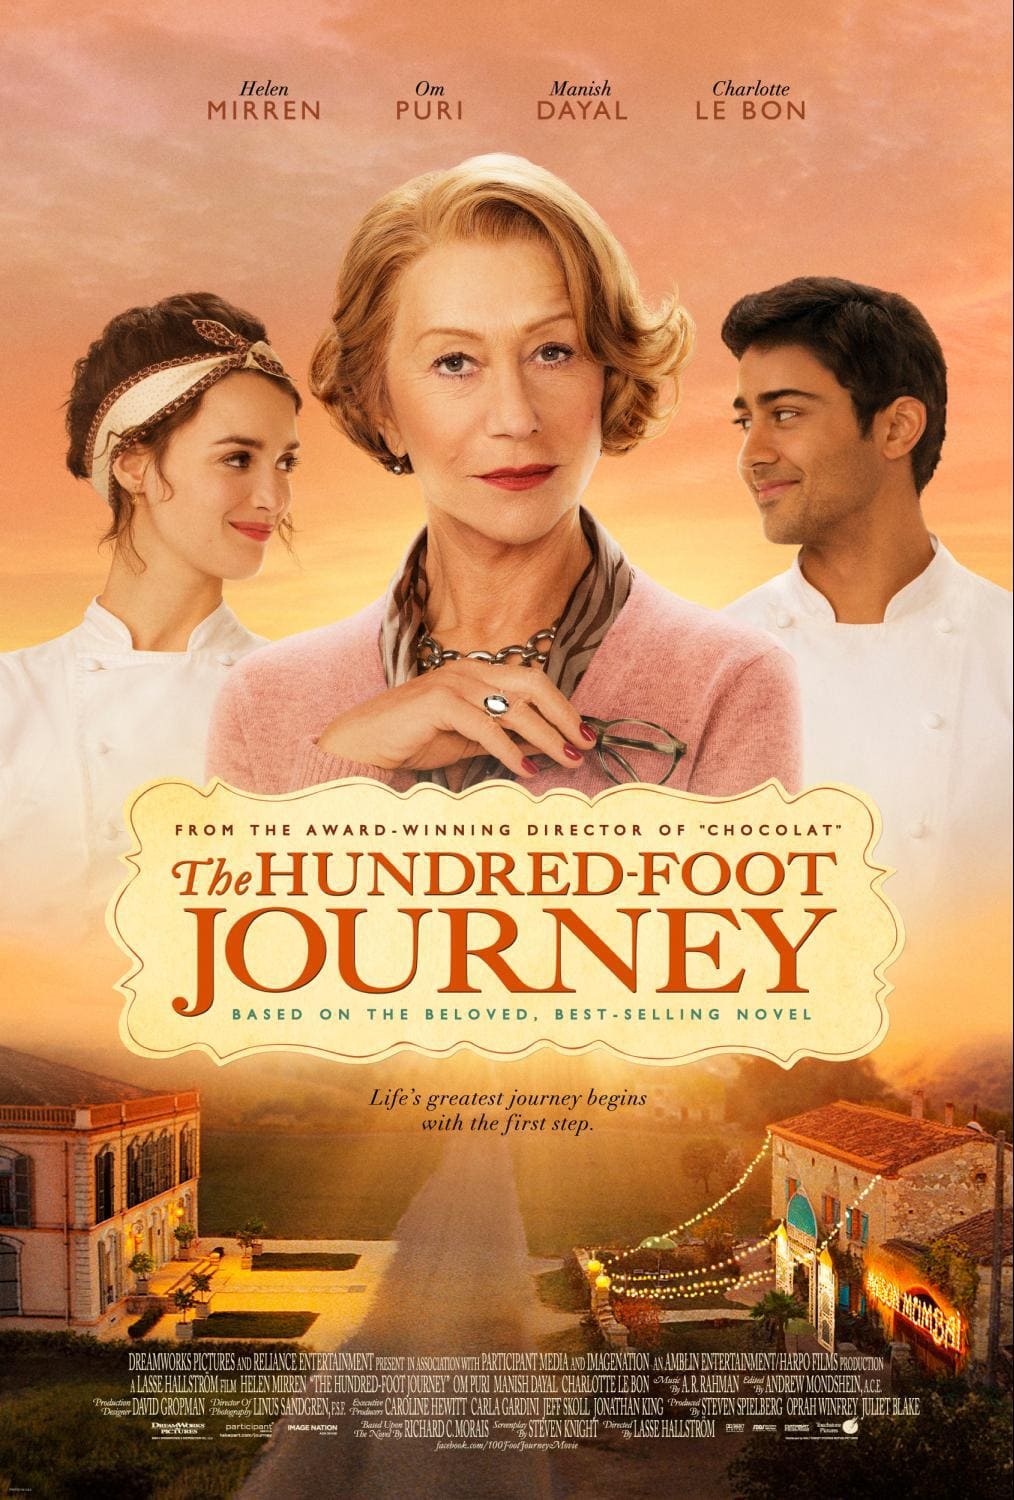 DreamWorks Pictures’ THE HUNDRED-FOOT JOURNEY Trailer Available